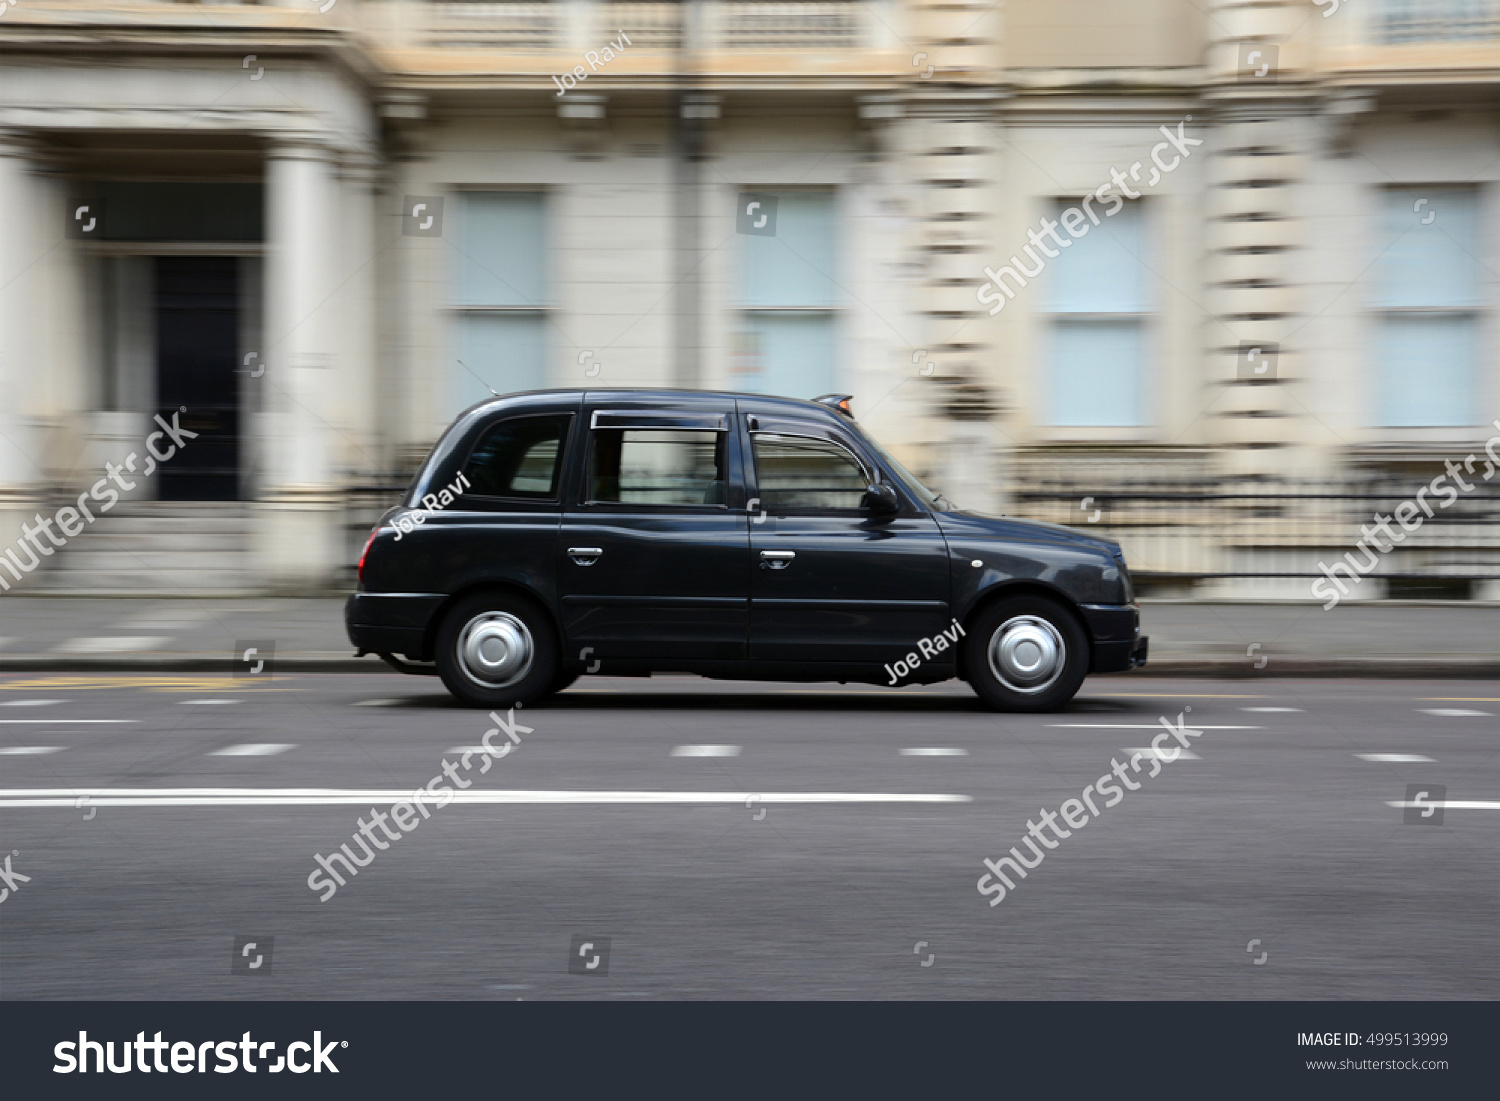 Panning shot of a black taxi in London. #499513999